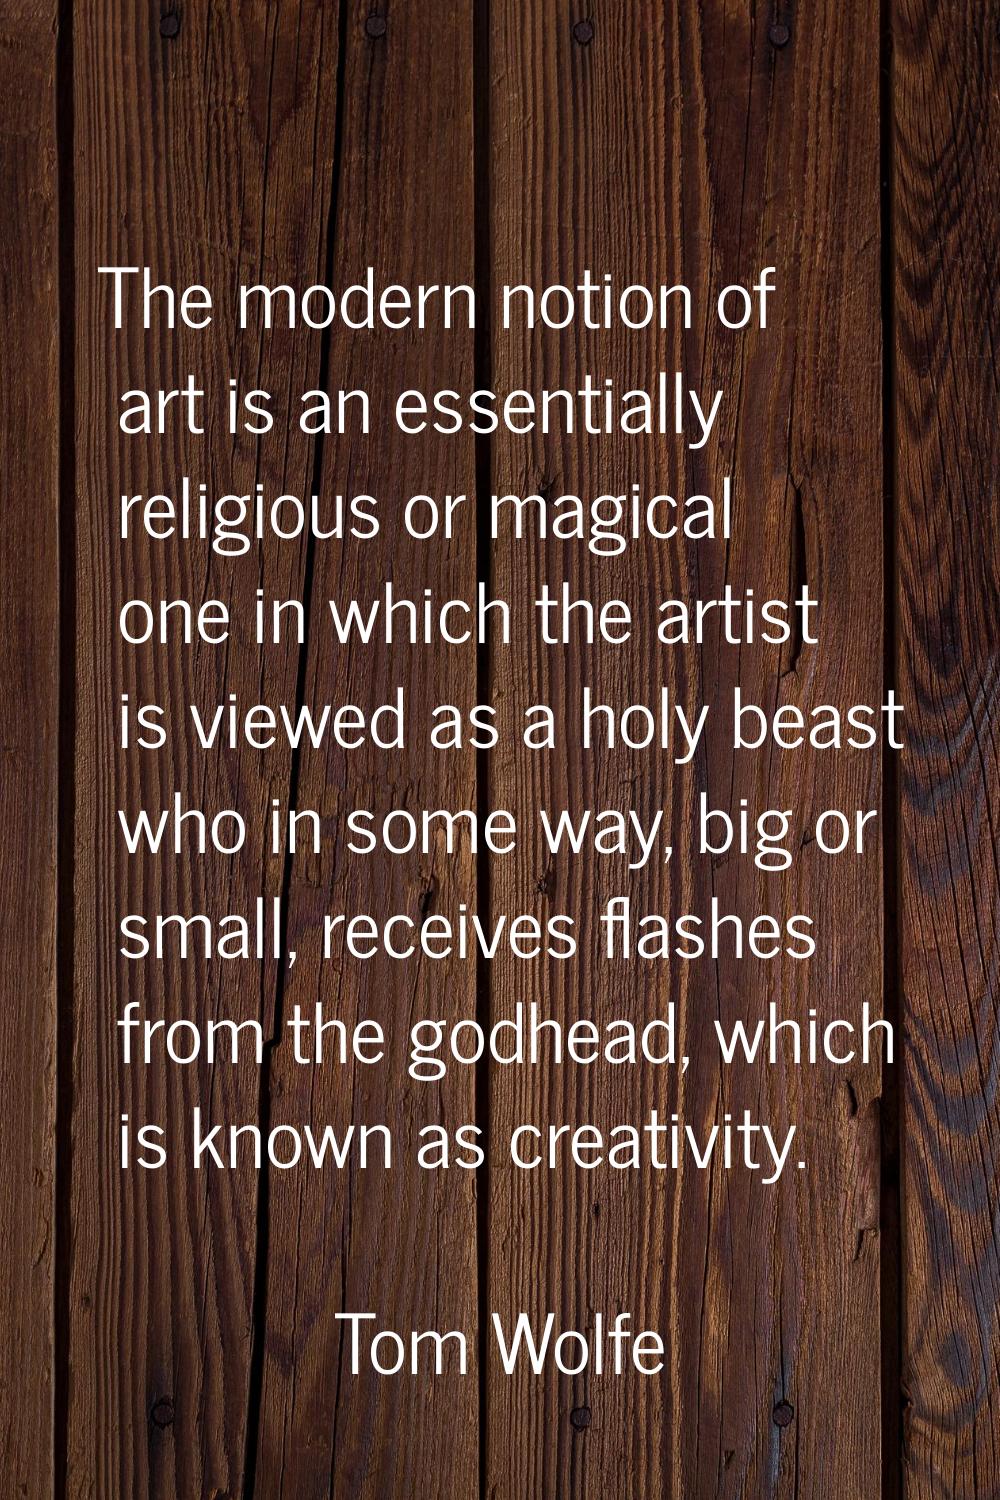 The modern notion of art is an essentially religious or magical one in which the artist is viewed a